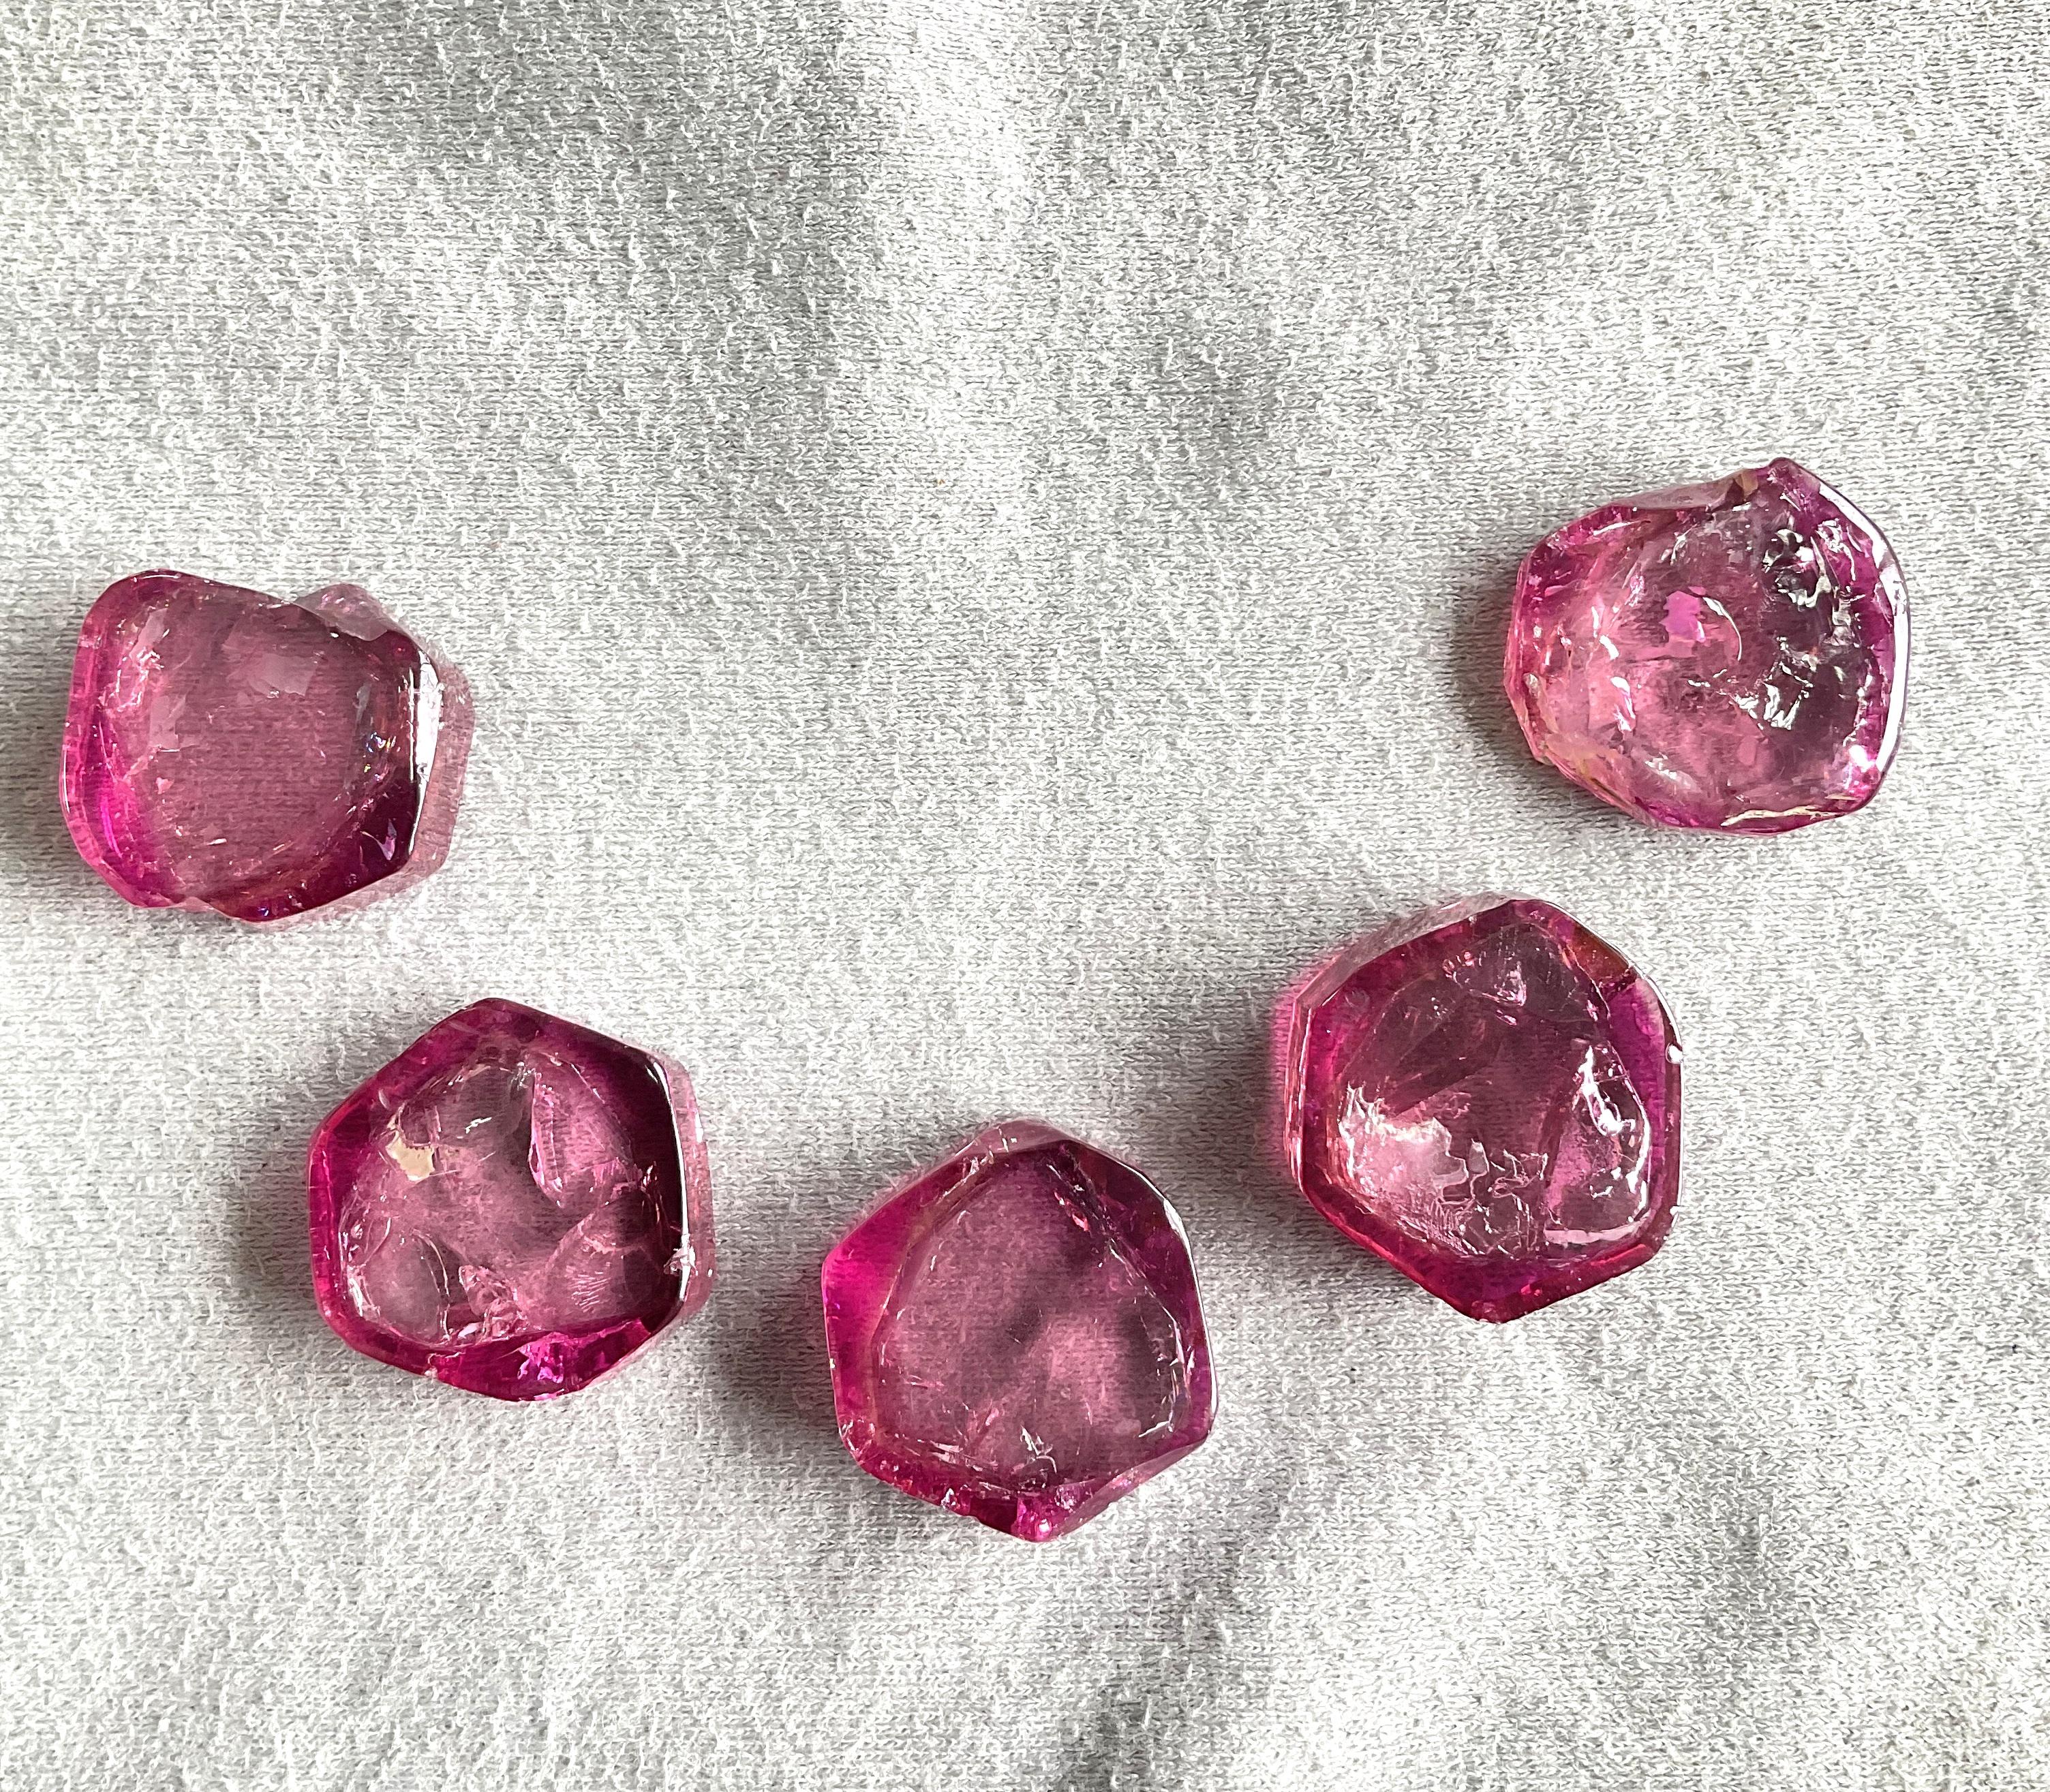 Art Deco 239.56 Carats Pink Color Tourmaline Natural Slices For Top Fine Jewelry Gemstone For Sale